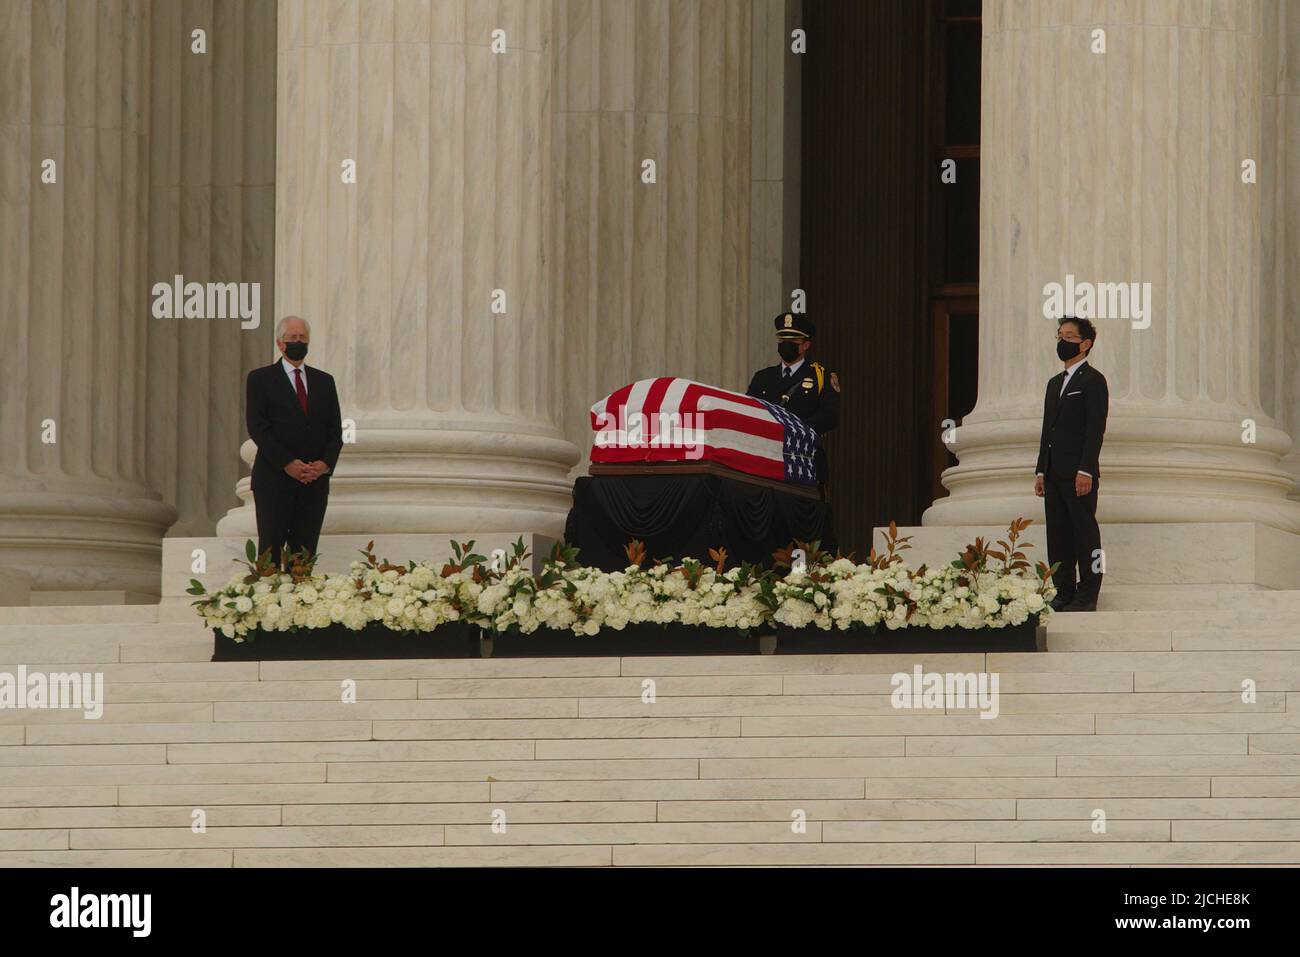 Washington - 24 September 2020: An honor guard stands at attention with U.S. Supreme Court Justice Ruth Bader Ginsburg's casket as it lies in state. Stock Photo